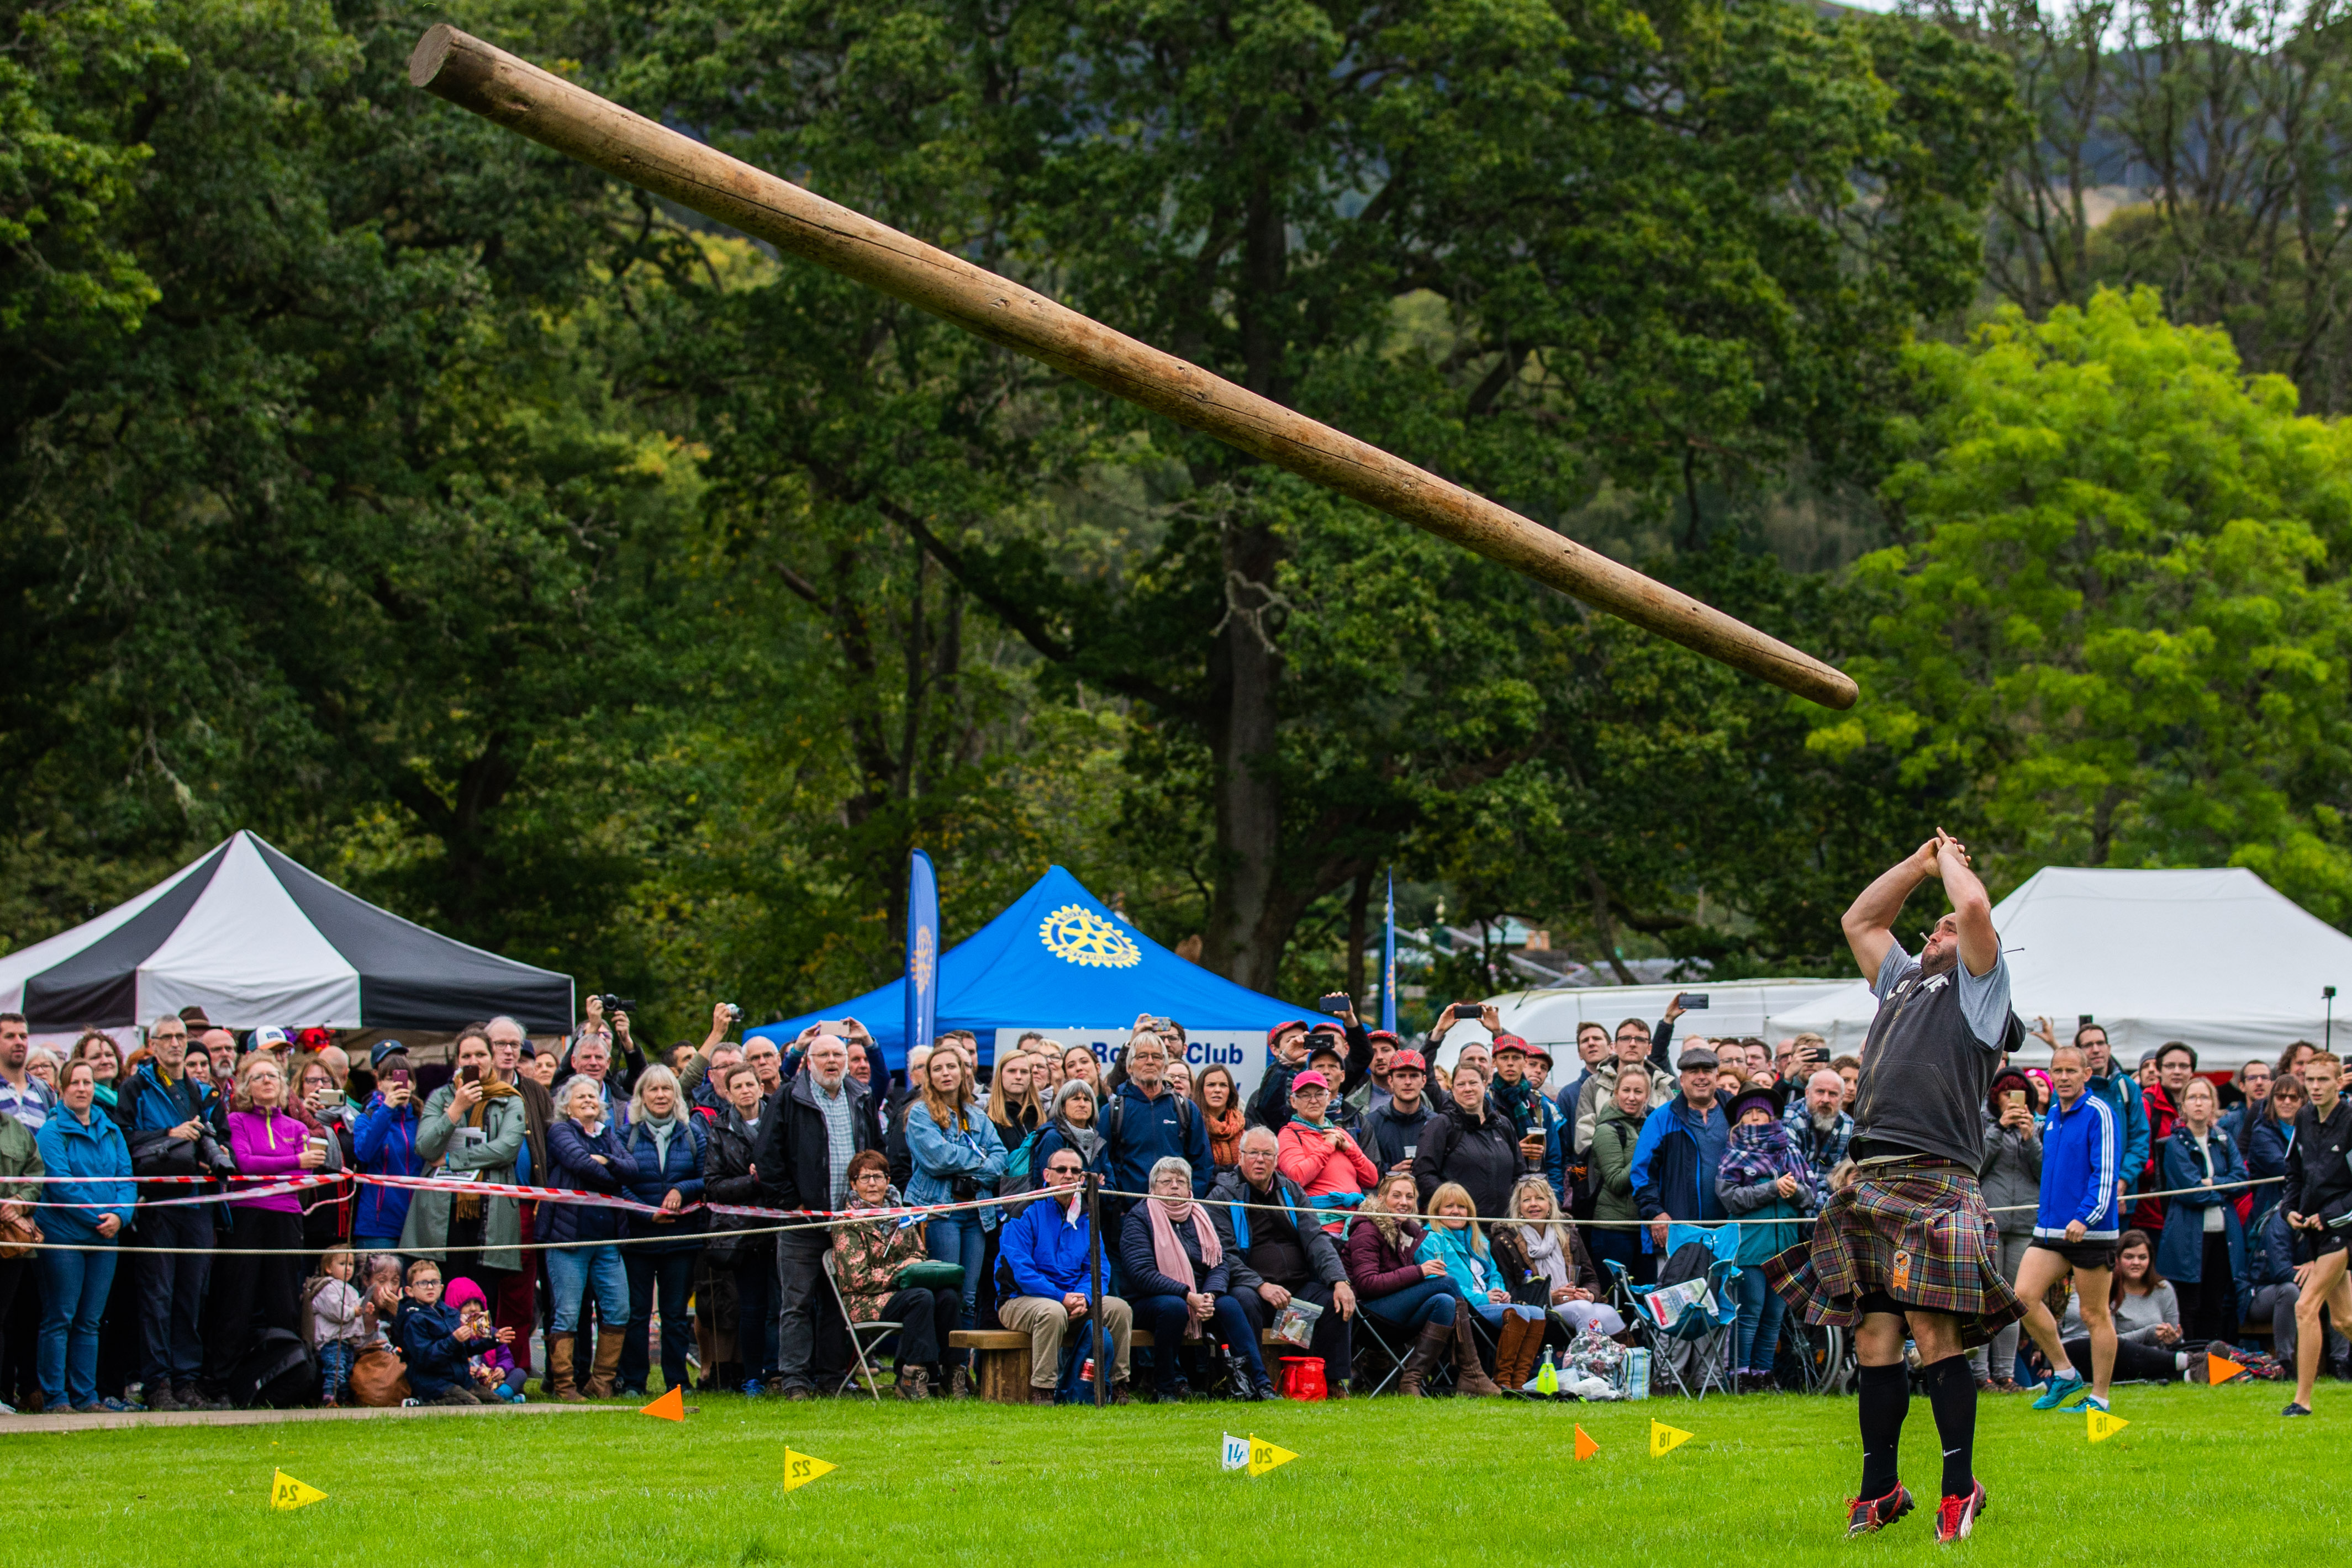 Tossing the caber in 2019.